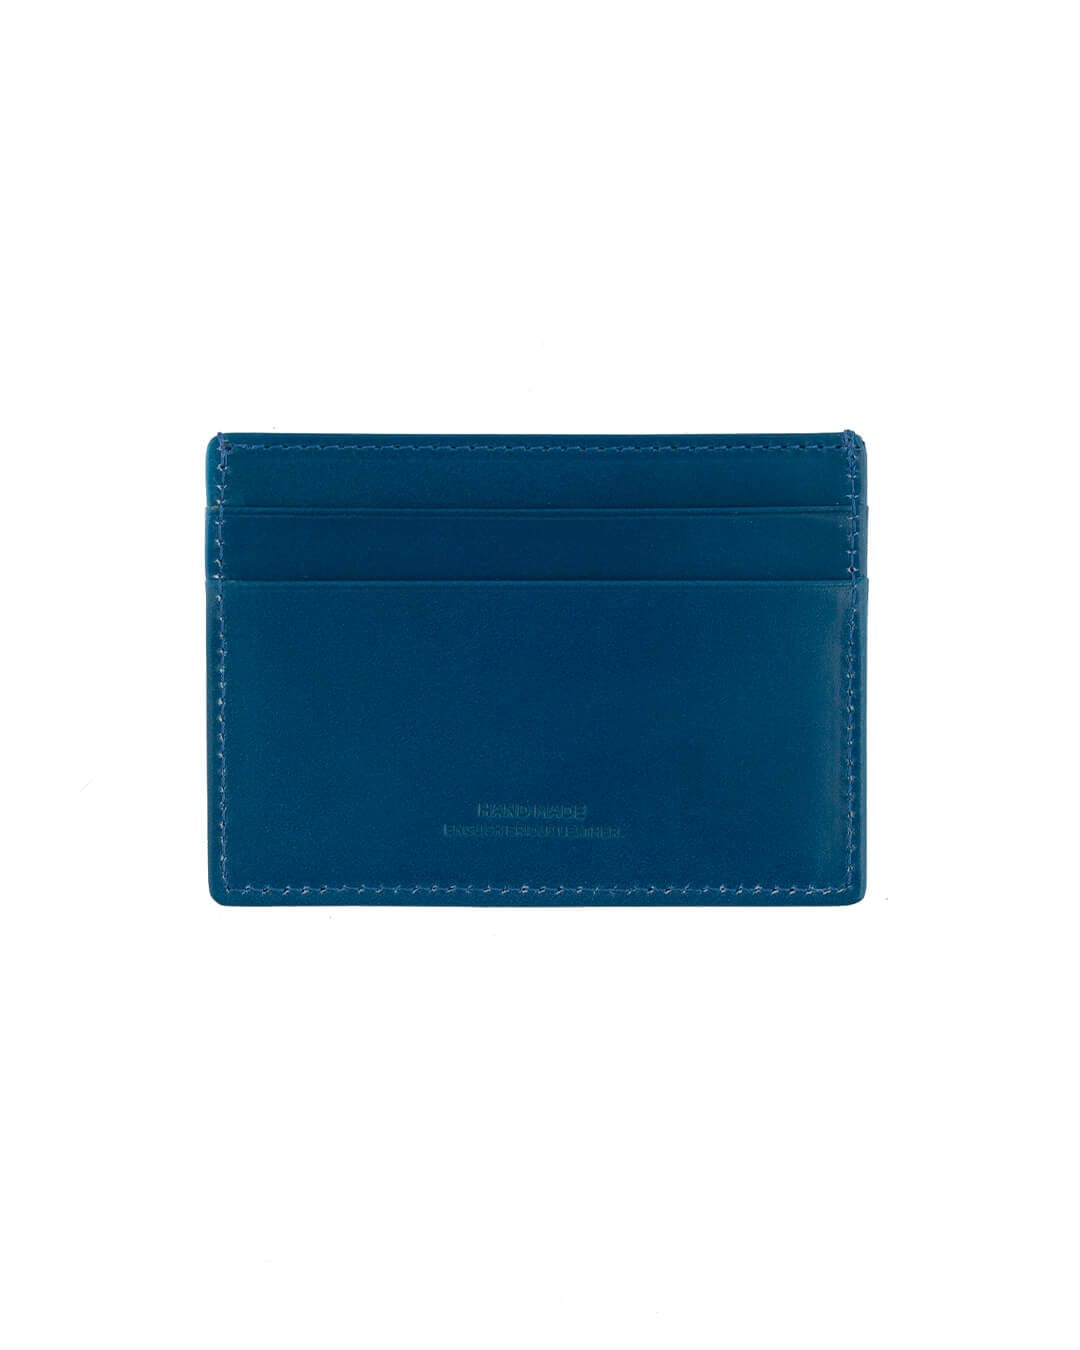 Cavesson&#39;s Wallets Cavesson&#39;s Peacock Card Case